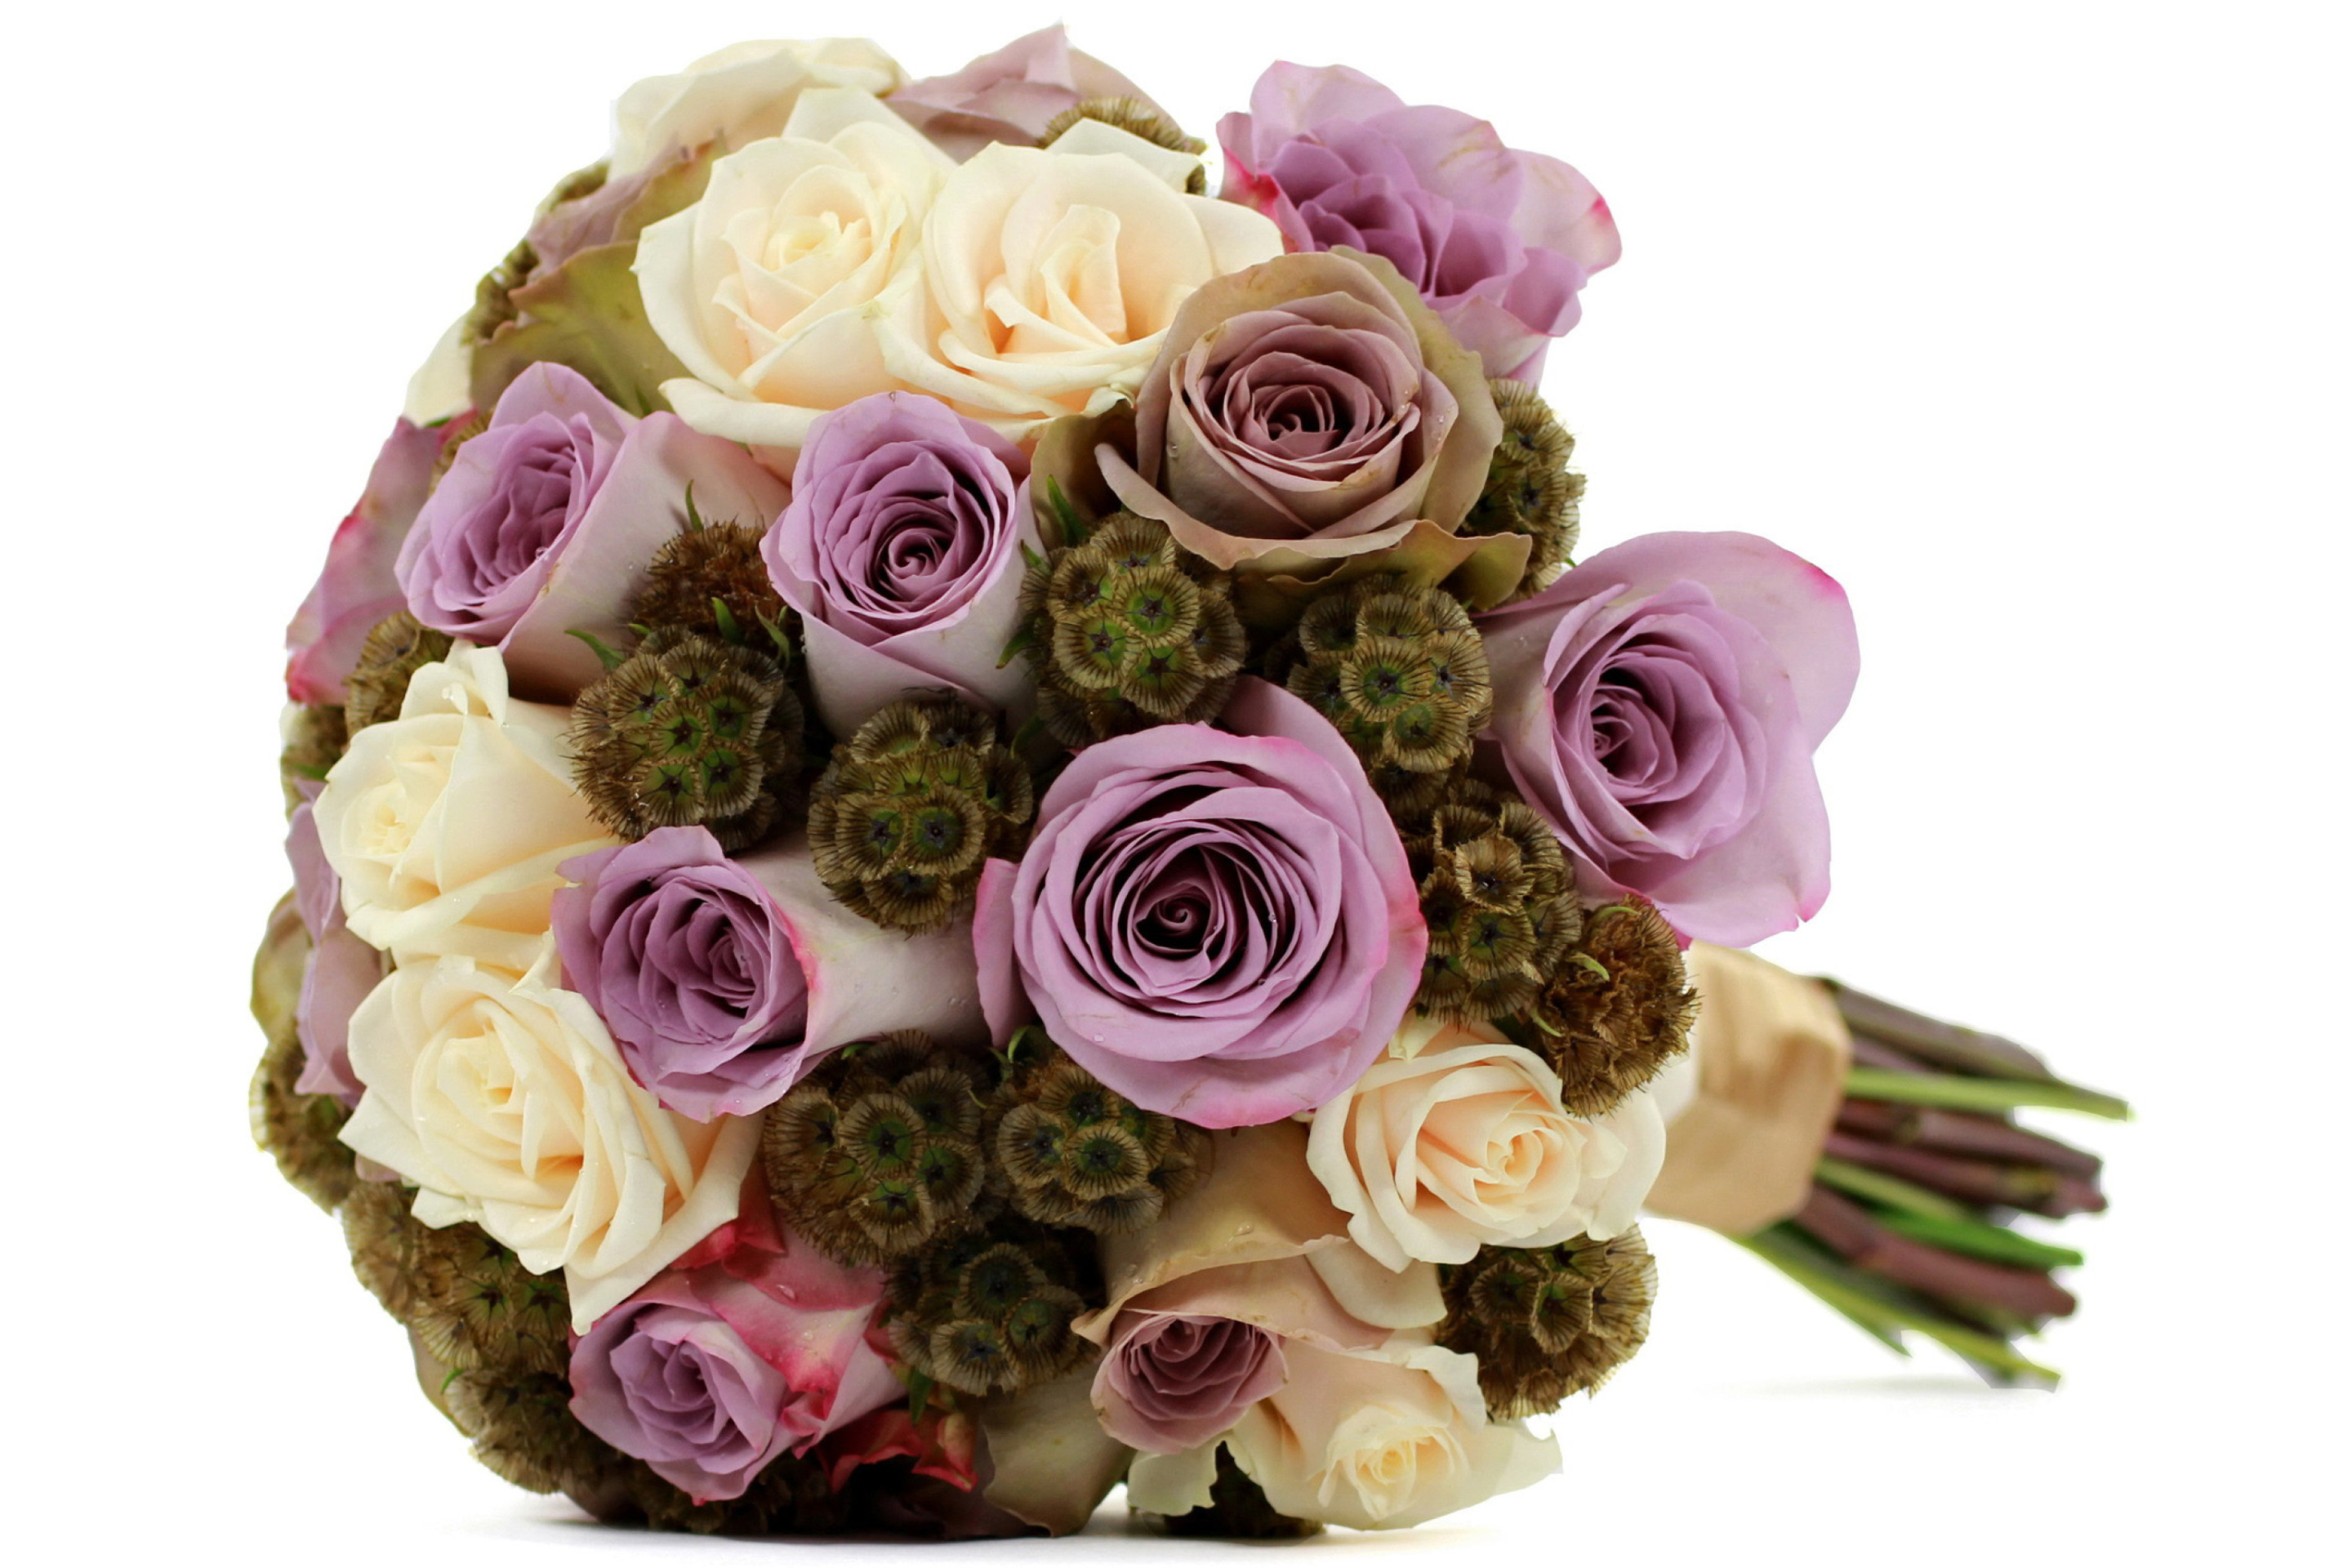 Das Bouquet with lilac roses Wallpaper 2880x1920